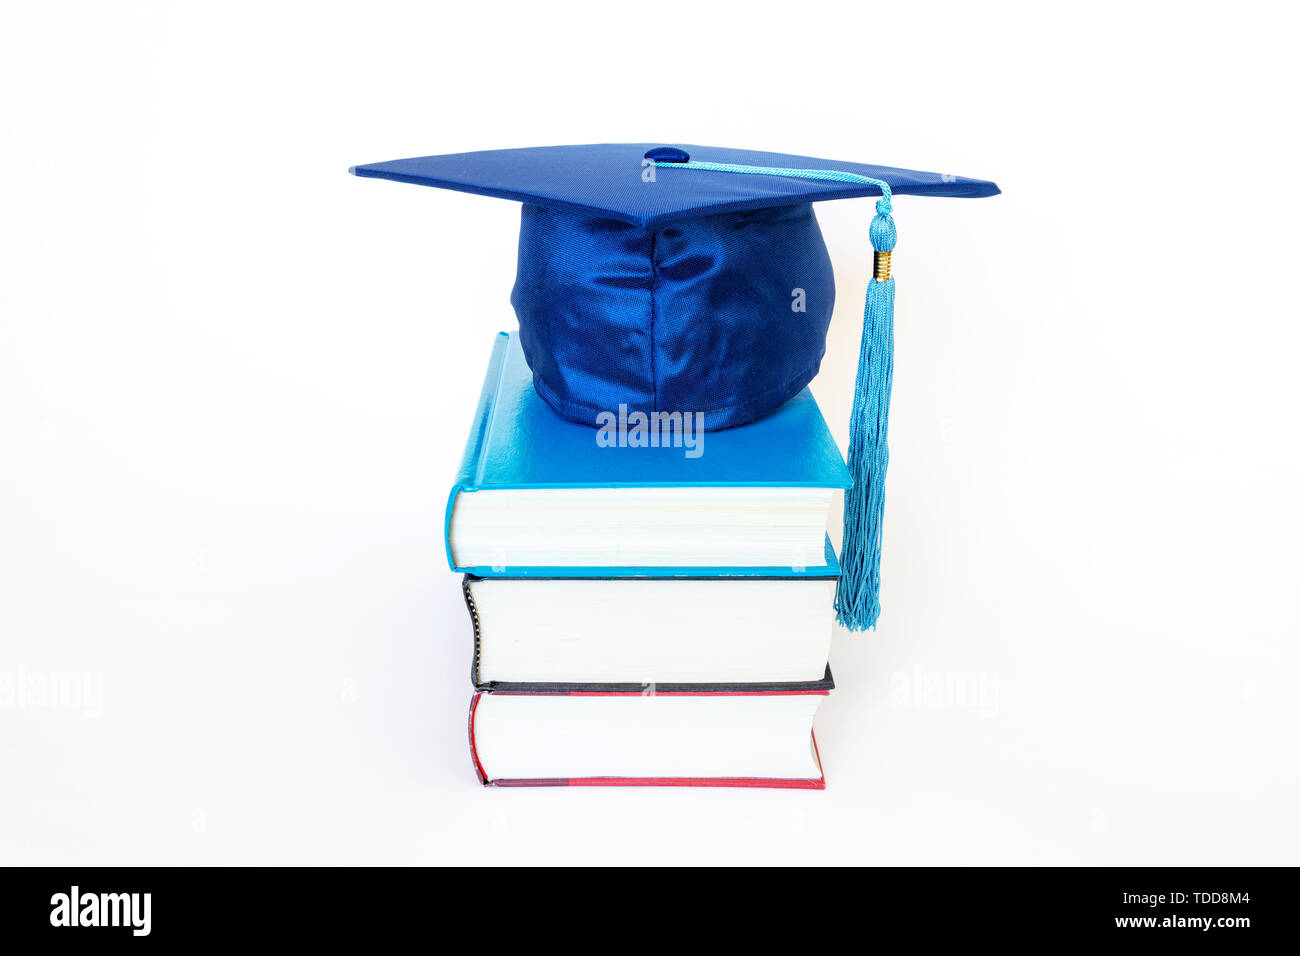 Blue graduation cap on top of books isolated on white background. Education concept. Stock Photo